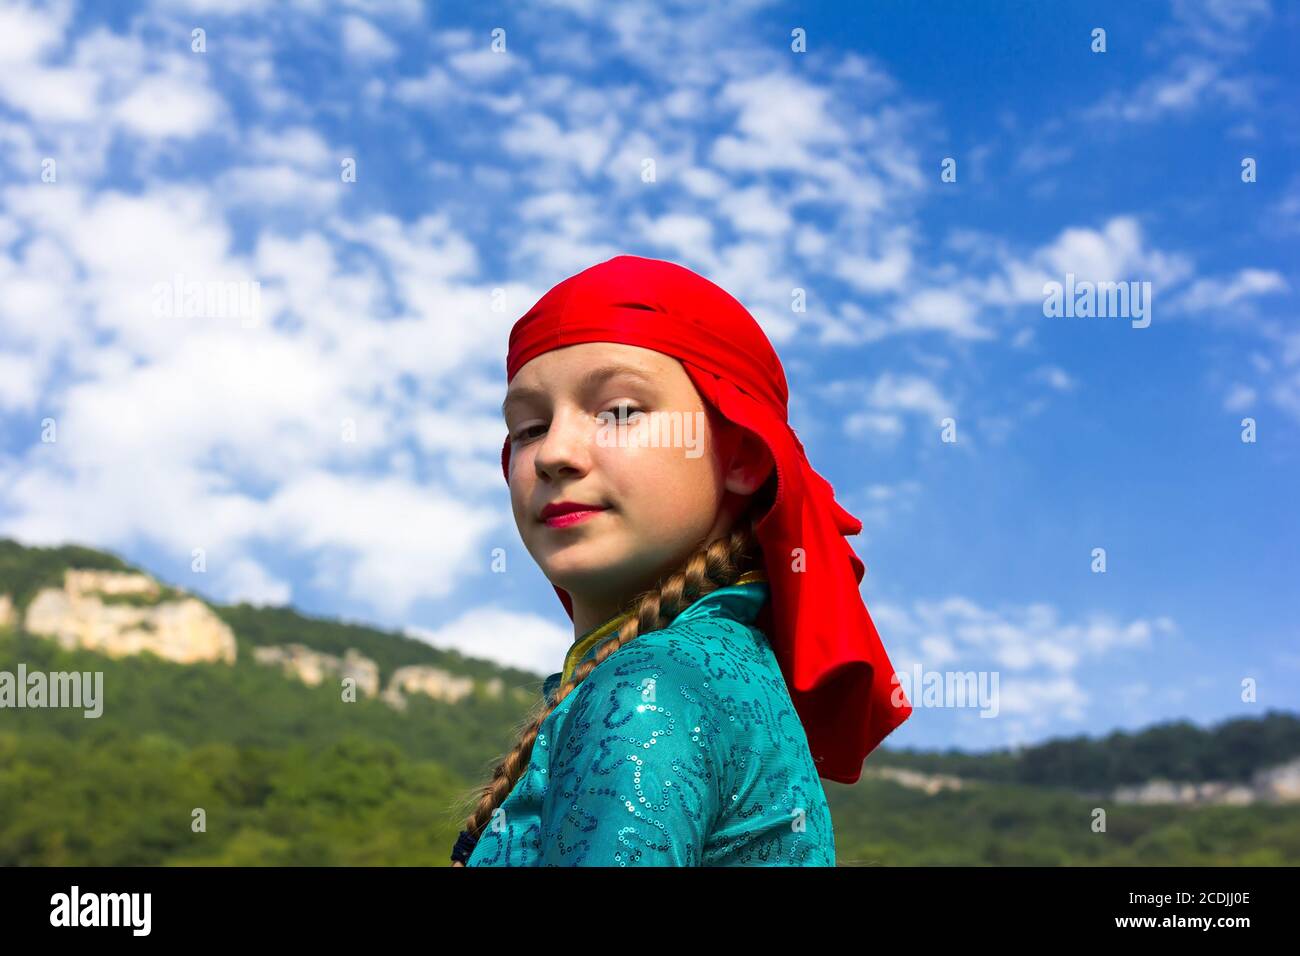 Adygea, RUSSIA - JULY 25 2015: Portrait of a young dancer in traditional Circassian dress on a background of sky and mountains. Ethnic festival in the Stock Photo